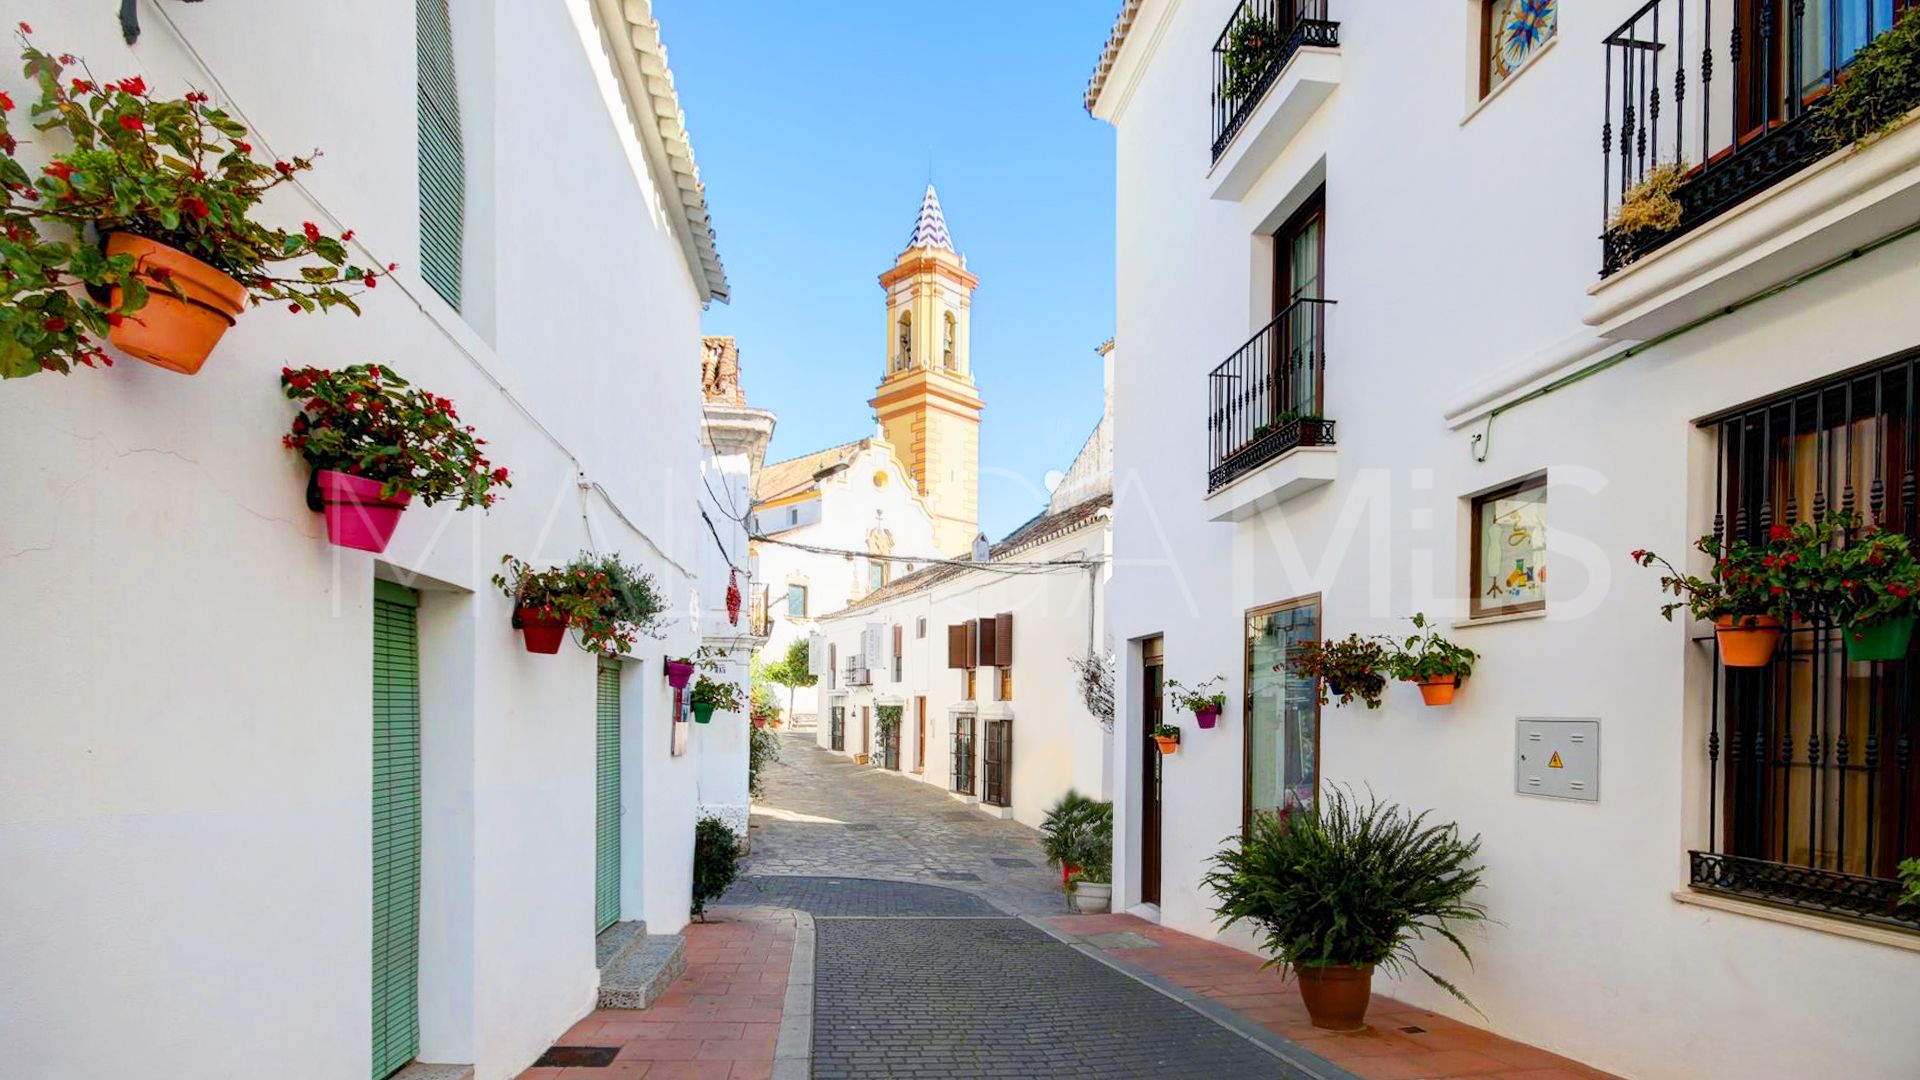 Terrain for sale in Estepona Old Town